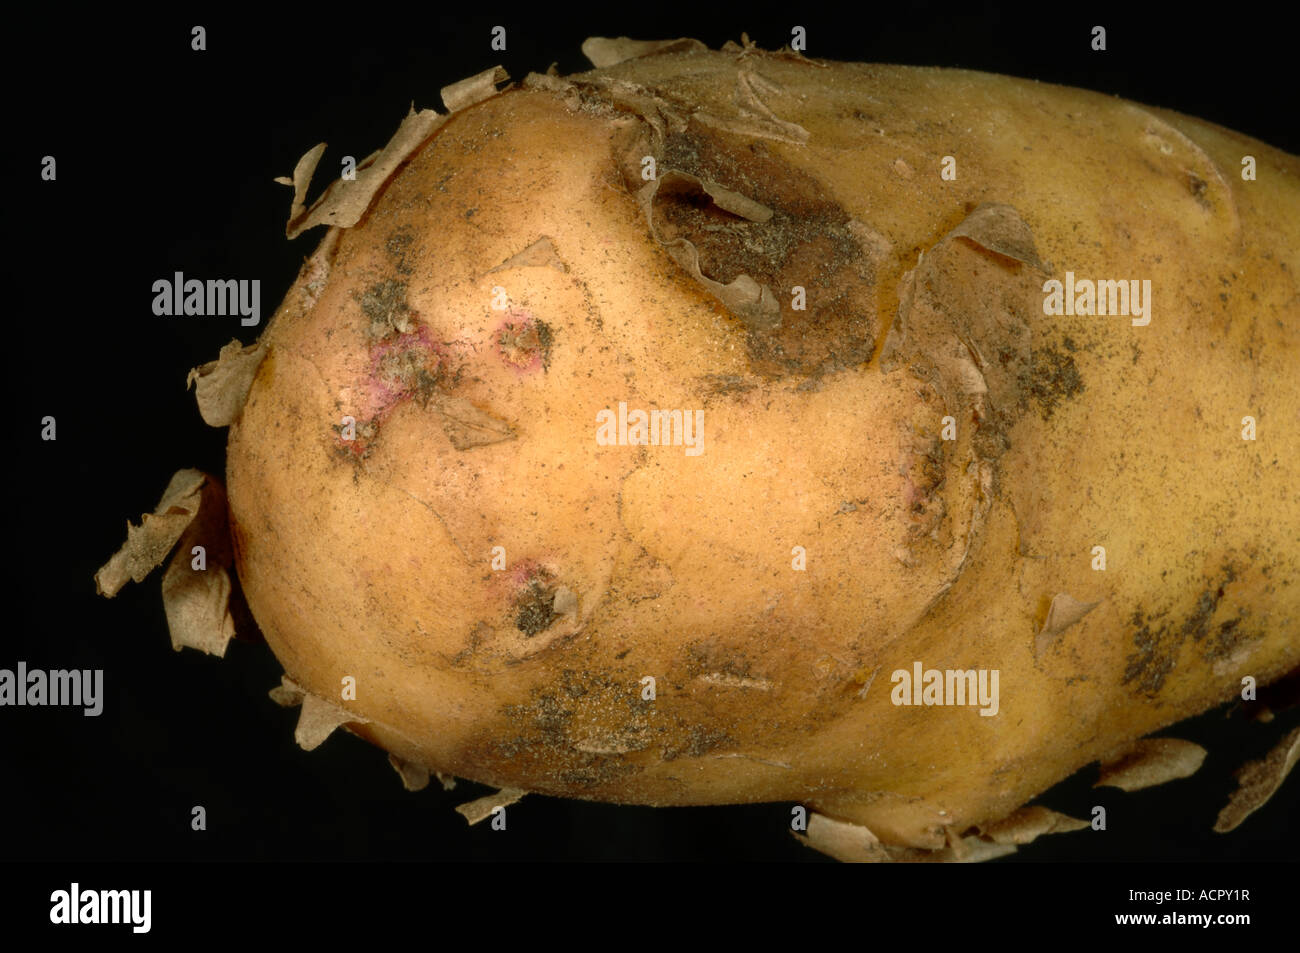 New potato tuber ex supermarket with loose outer skin Stock Photo